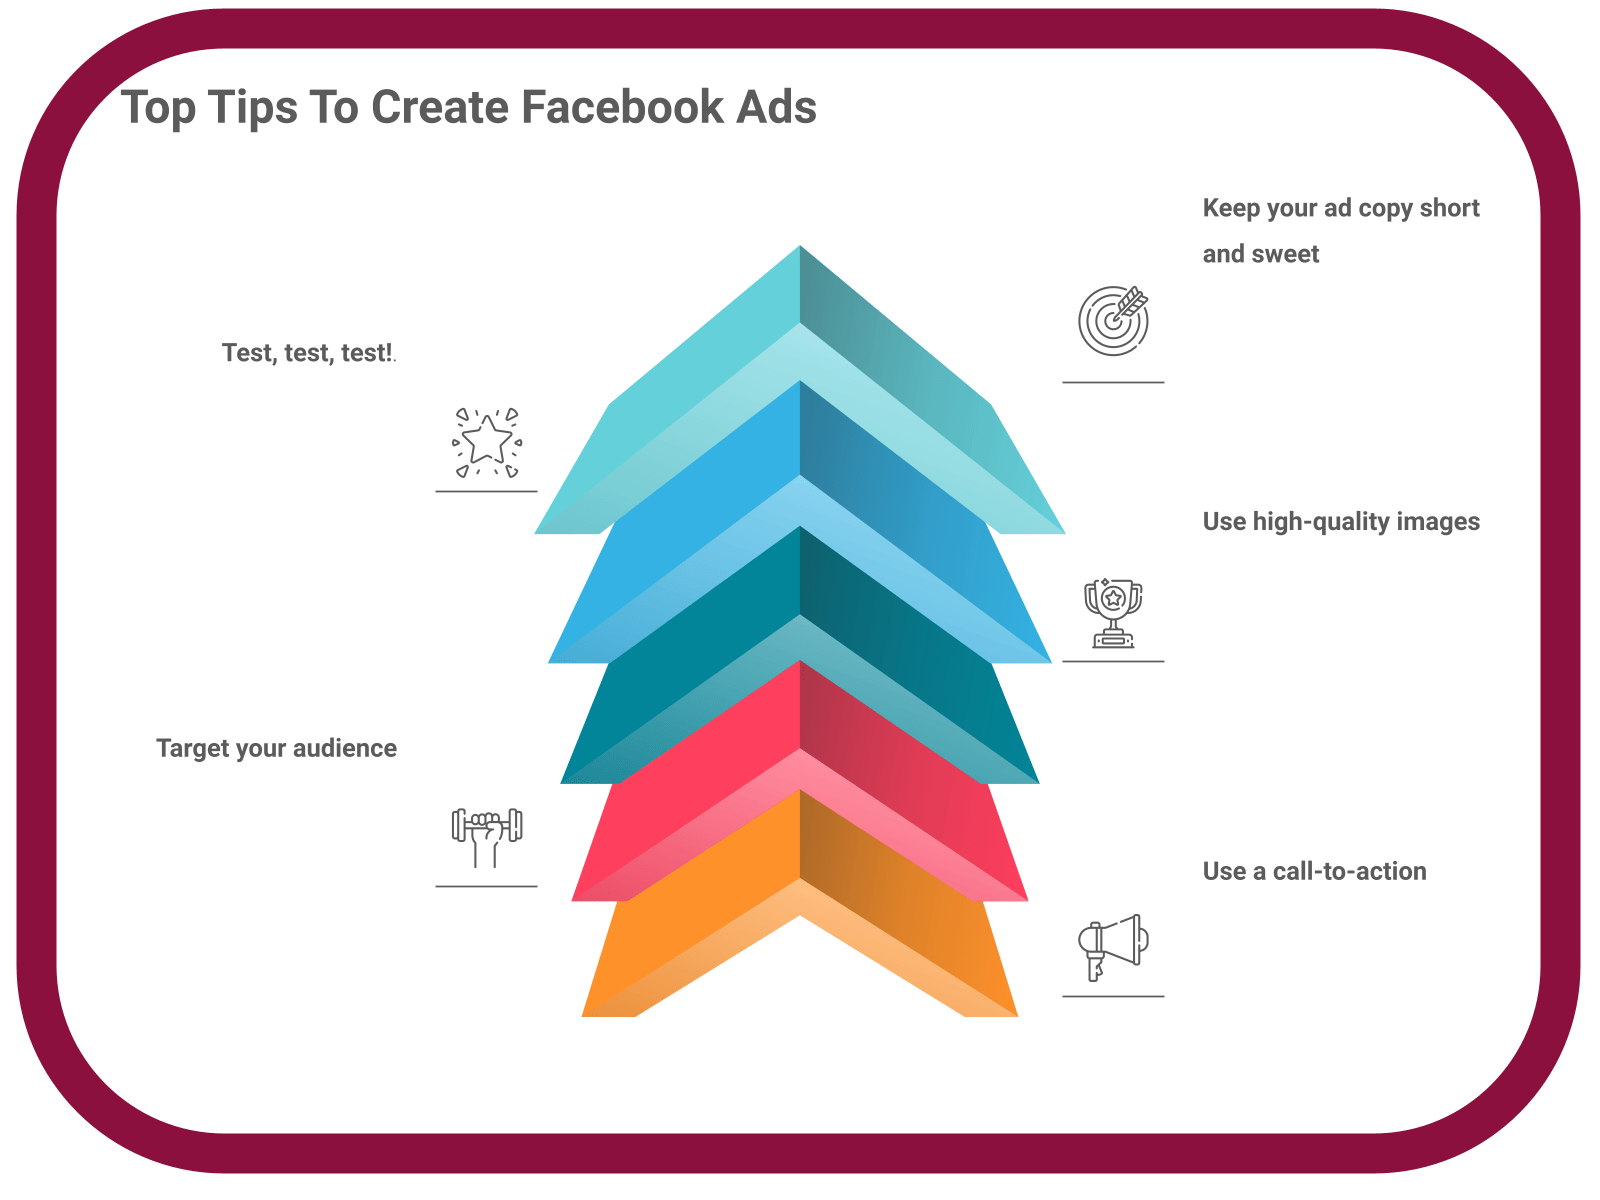 INFOGRAPHIC: Top Tips To Create Facebook Ads - Poll the People